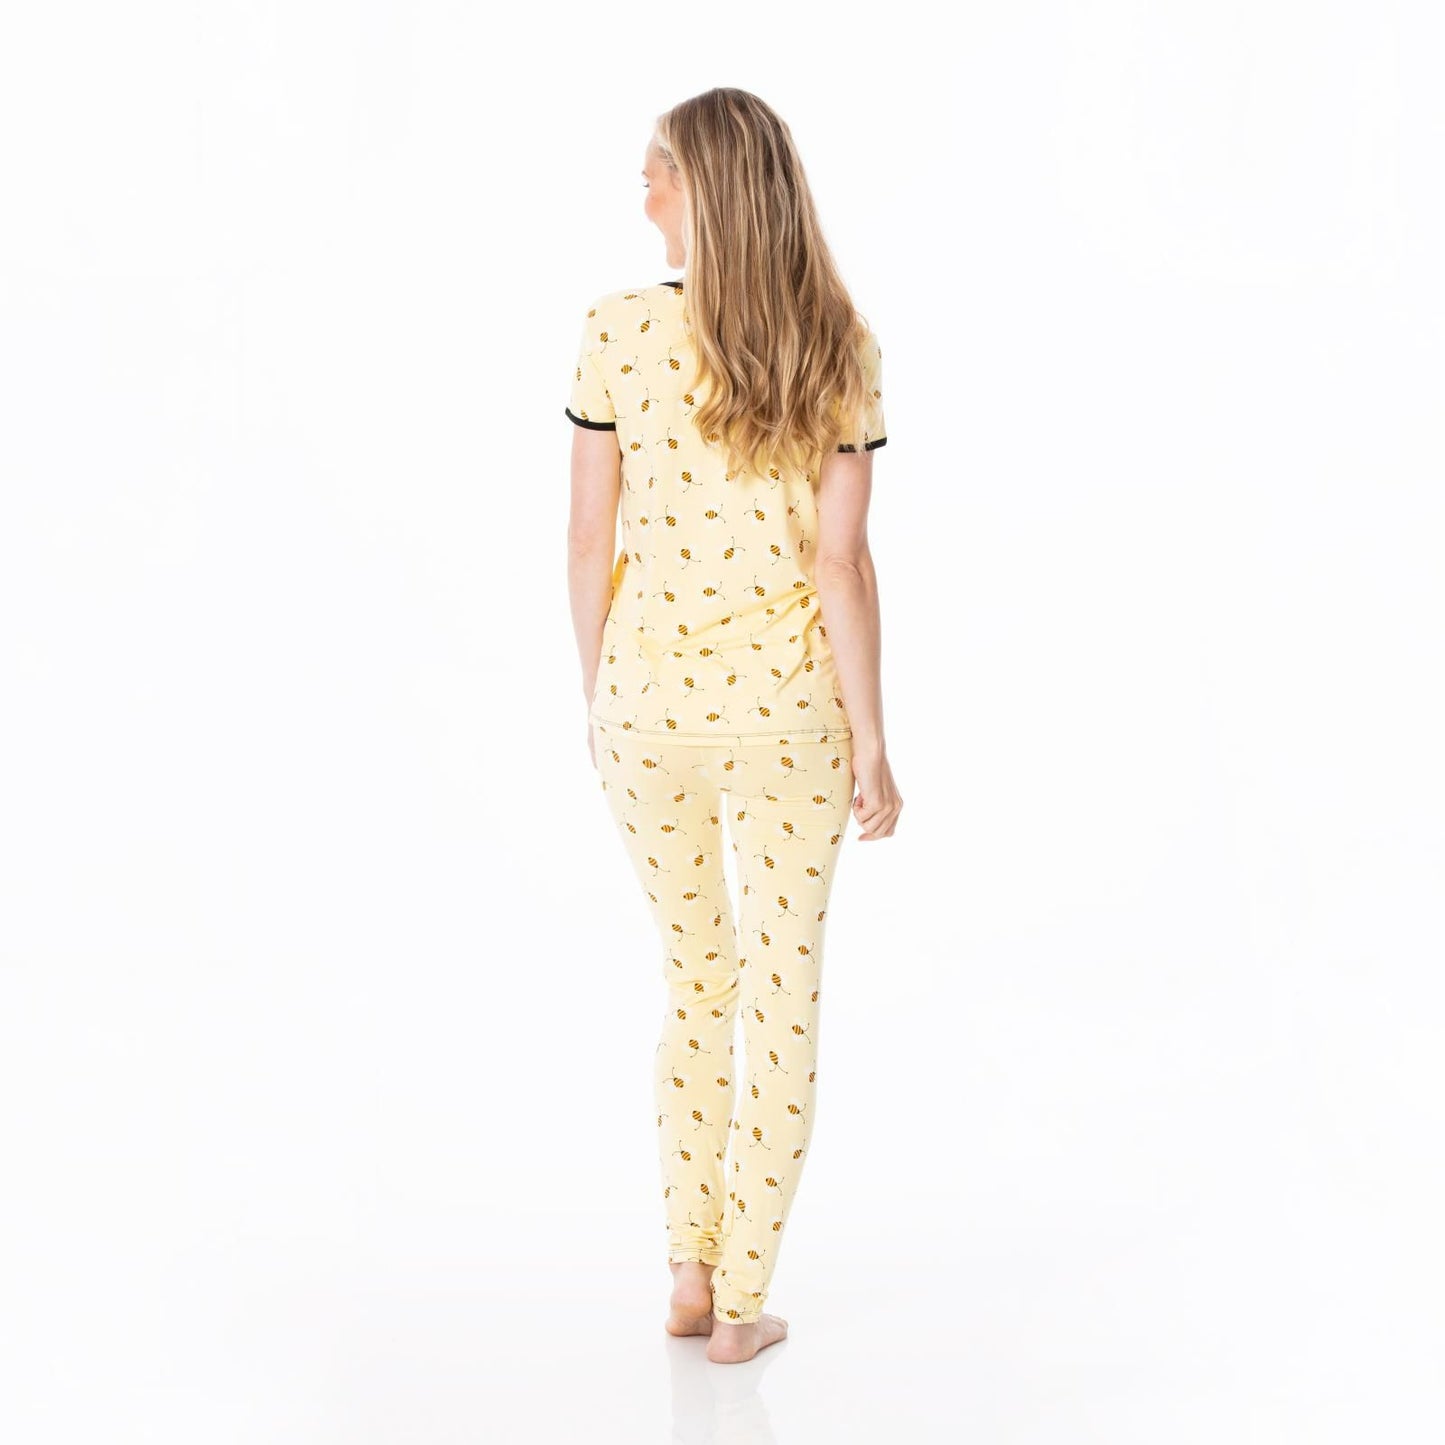 Women's Fitted Pajama Set (Short Sleeve) - Wallaby Bees